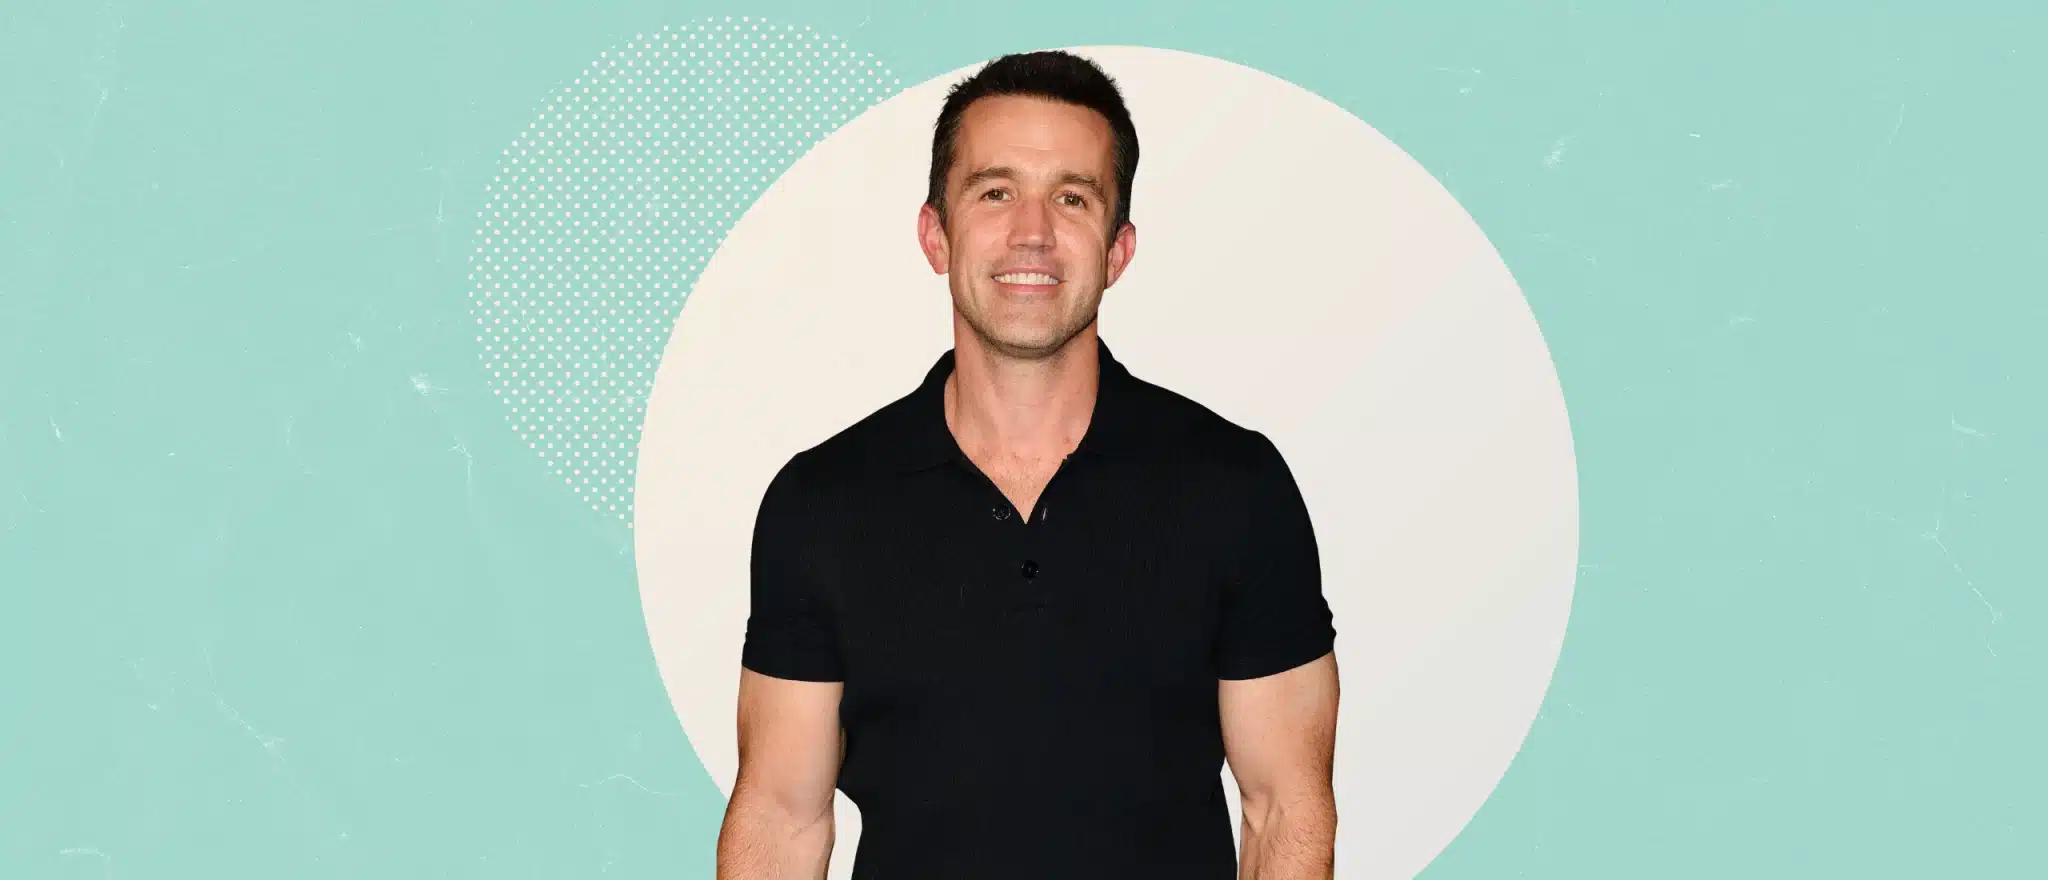 Rob McElhenney’s Smartest Workout, Diet, and Health Habits